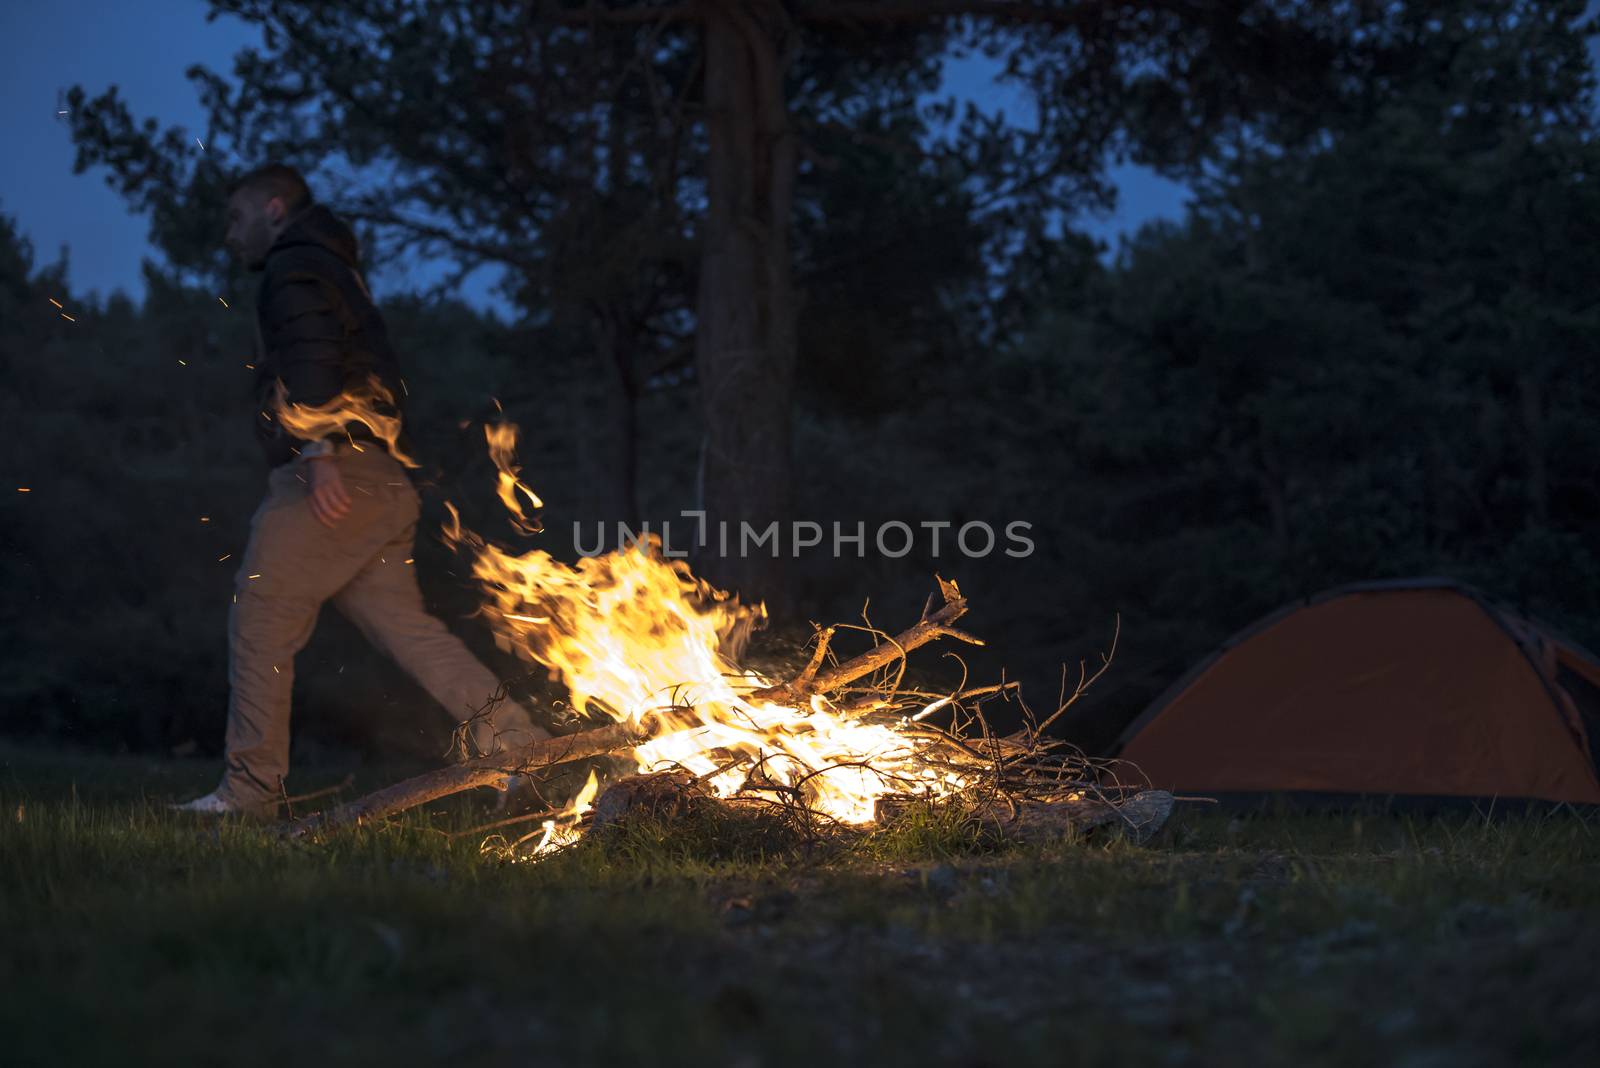 Man lights a fire in the fireplace in nature by deyan_georgiev